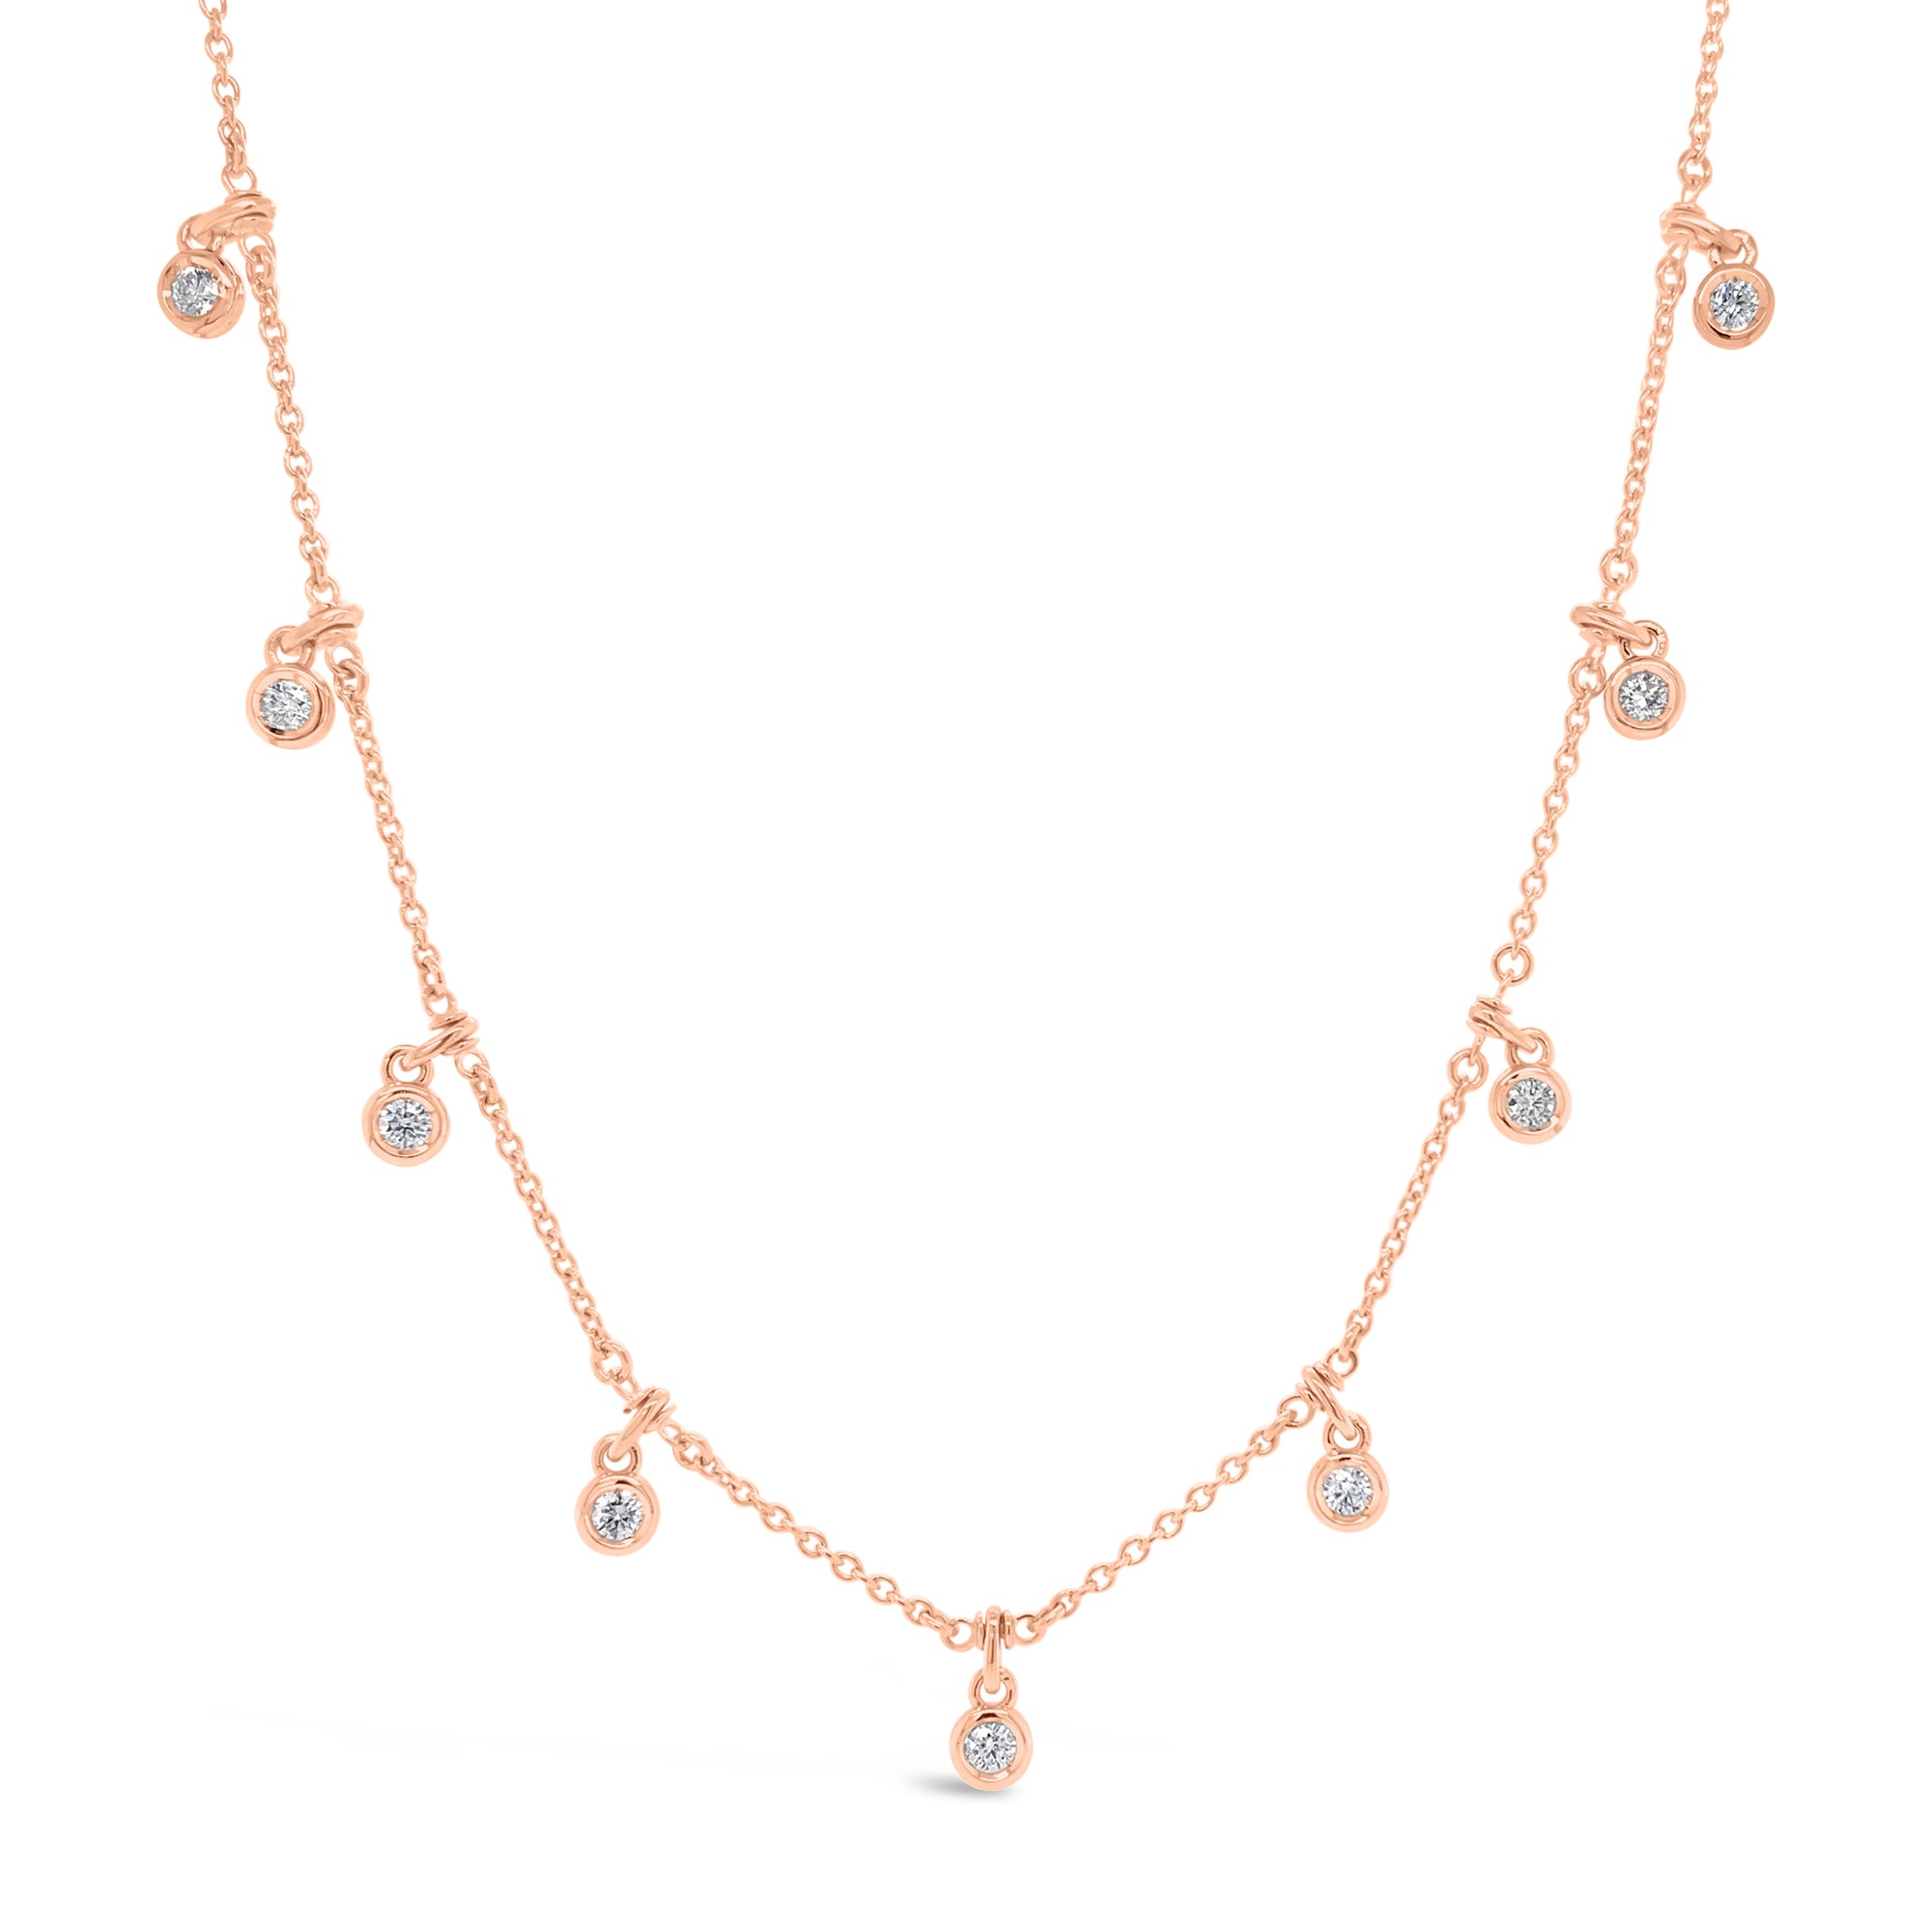 Diamond by the Yard Drip Necklace  - 14K gold weighing 6.25 grams.  - 9 round diamonds totaling 0.61 carats.